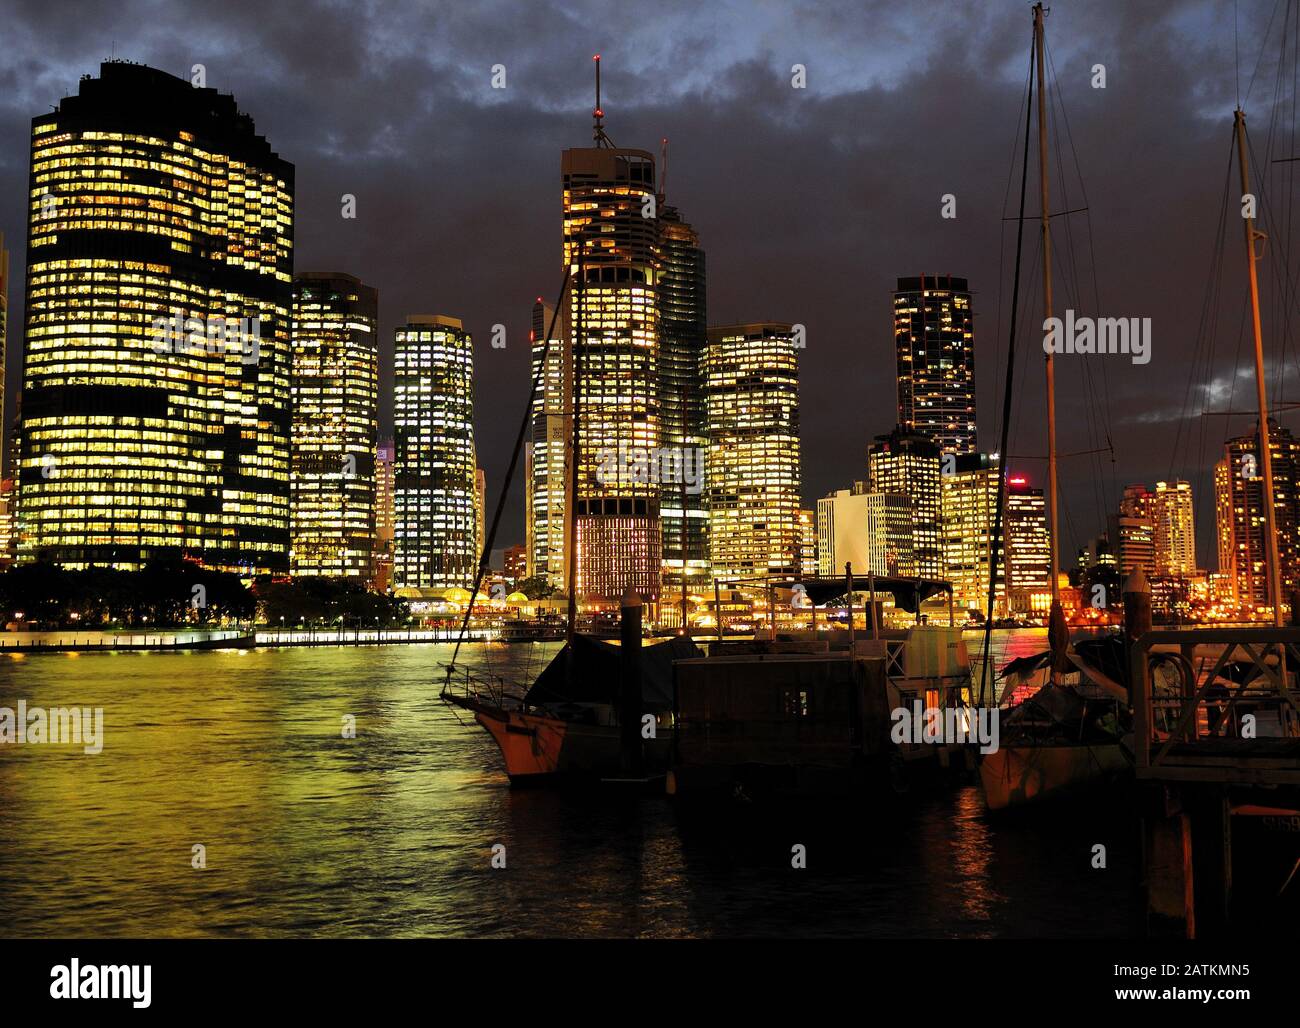 View From Kangaroo Point To The Brightly Illuminated Skyline Of Brisbane At Night Queensland Australia Stock Photo